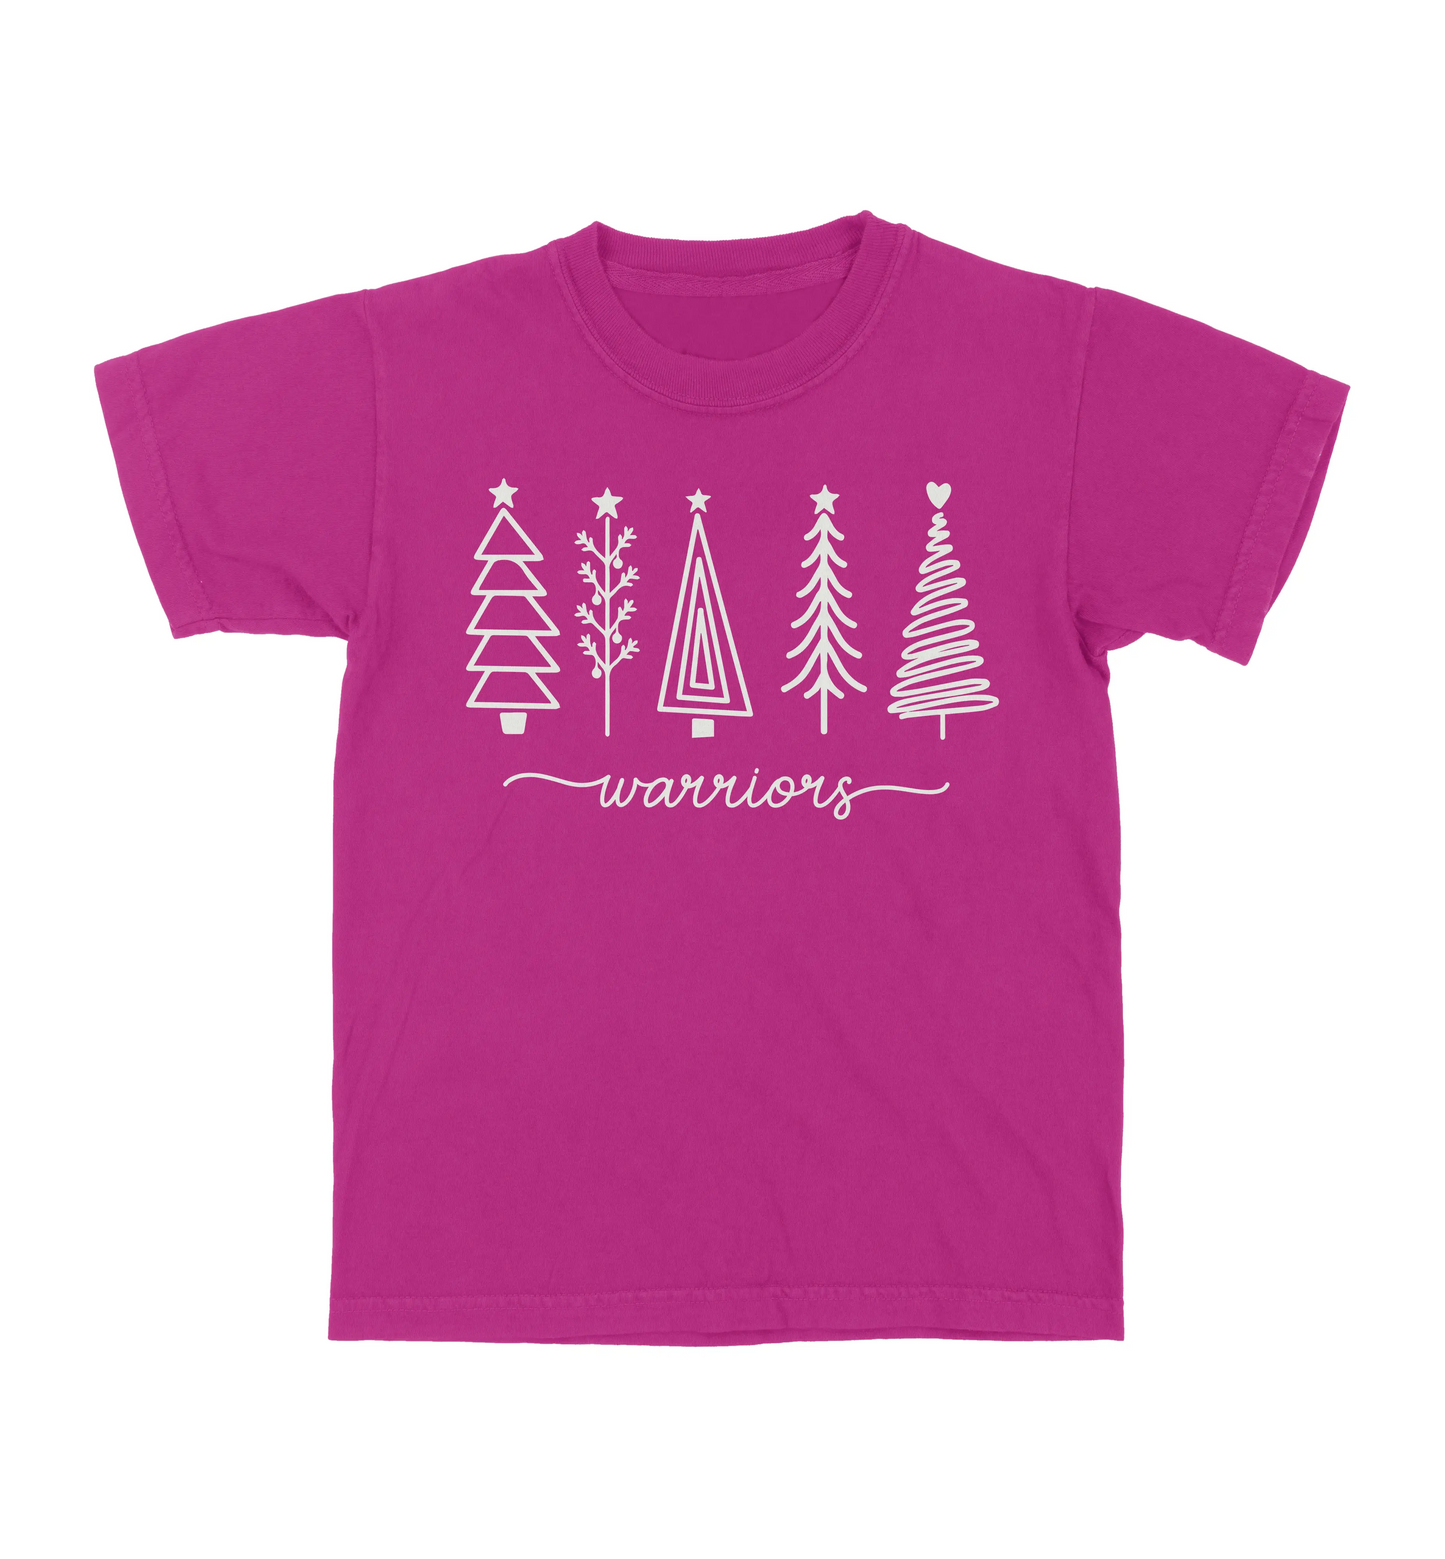 Christmas Warriors Tshirt - YOUTH and ADULT